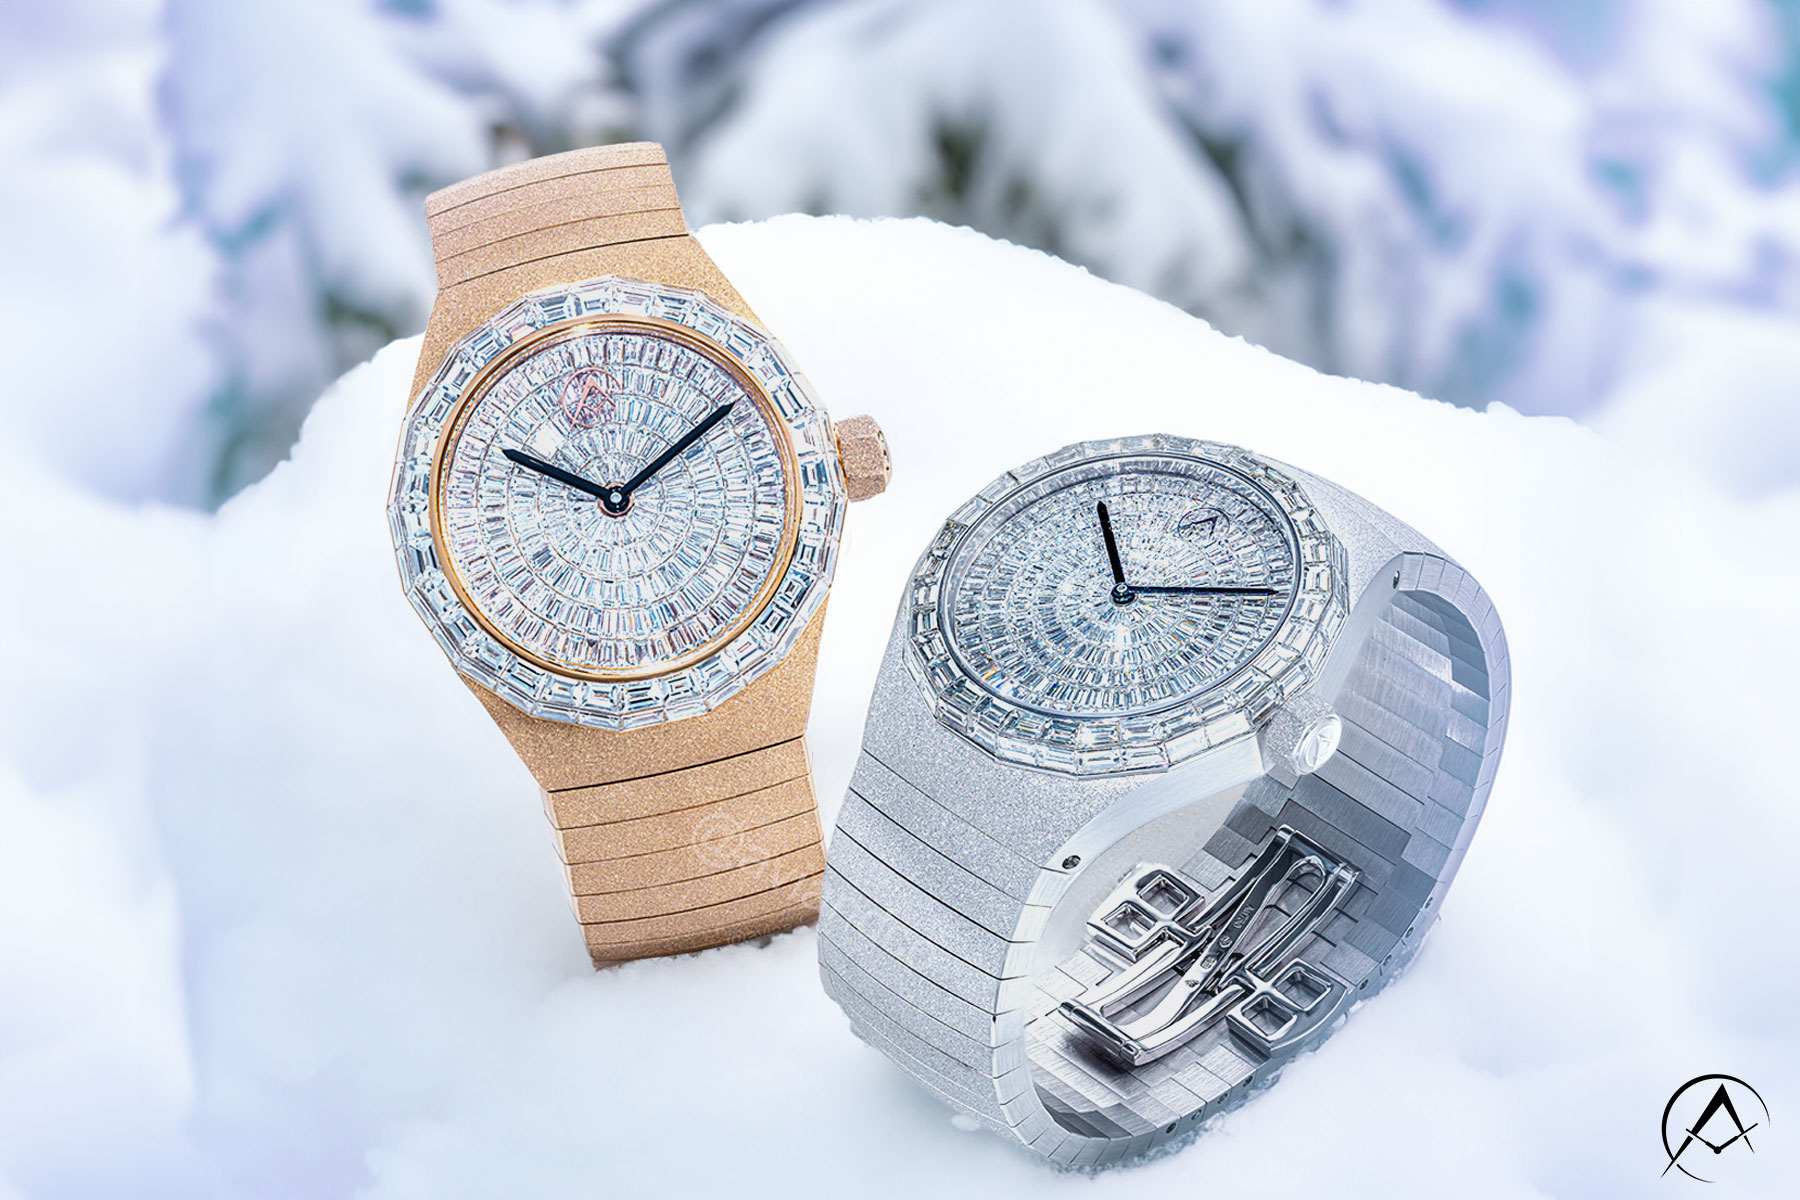 40 mm Avi & Co. Frosted Collection in Both White Gold and Rose Gold Sitting in the Snow.